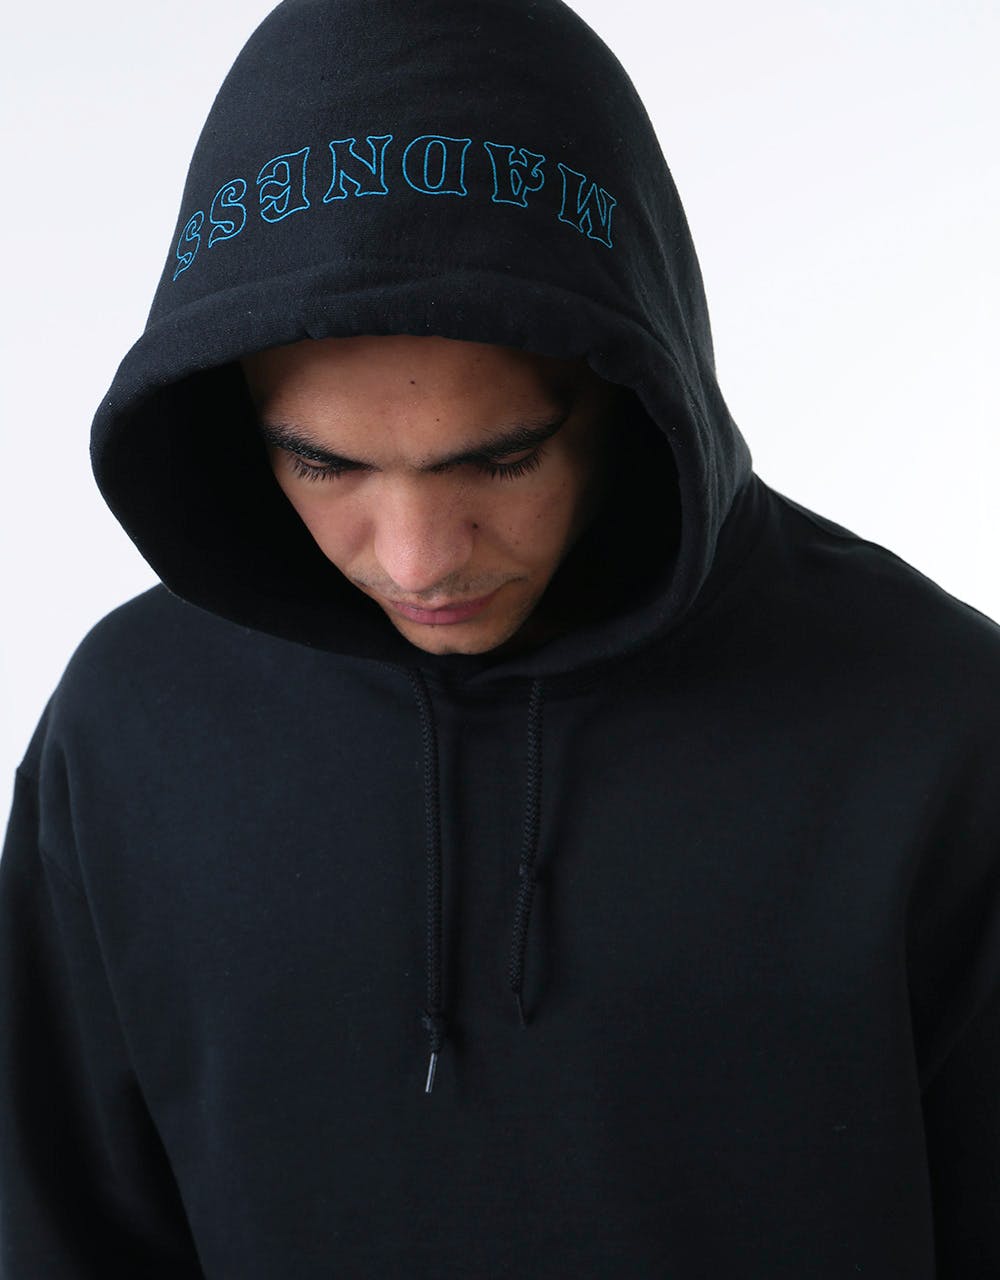 Madness Great Goat Pullover Hoodie - Black